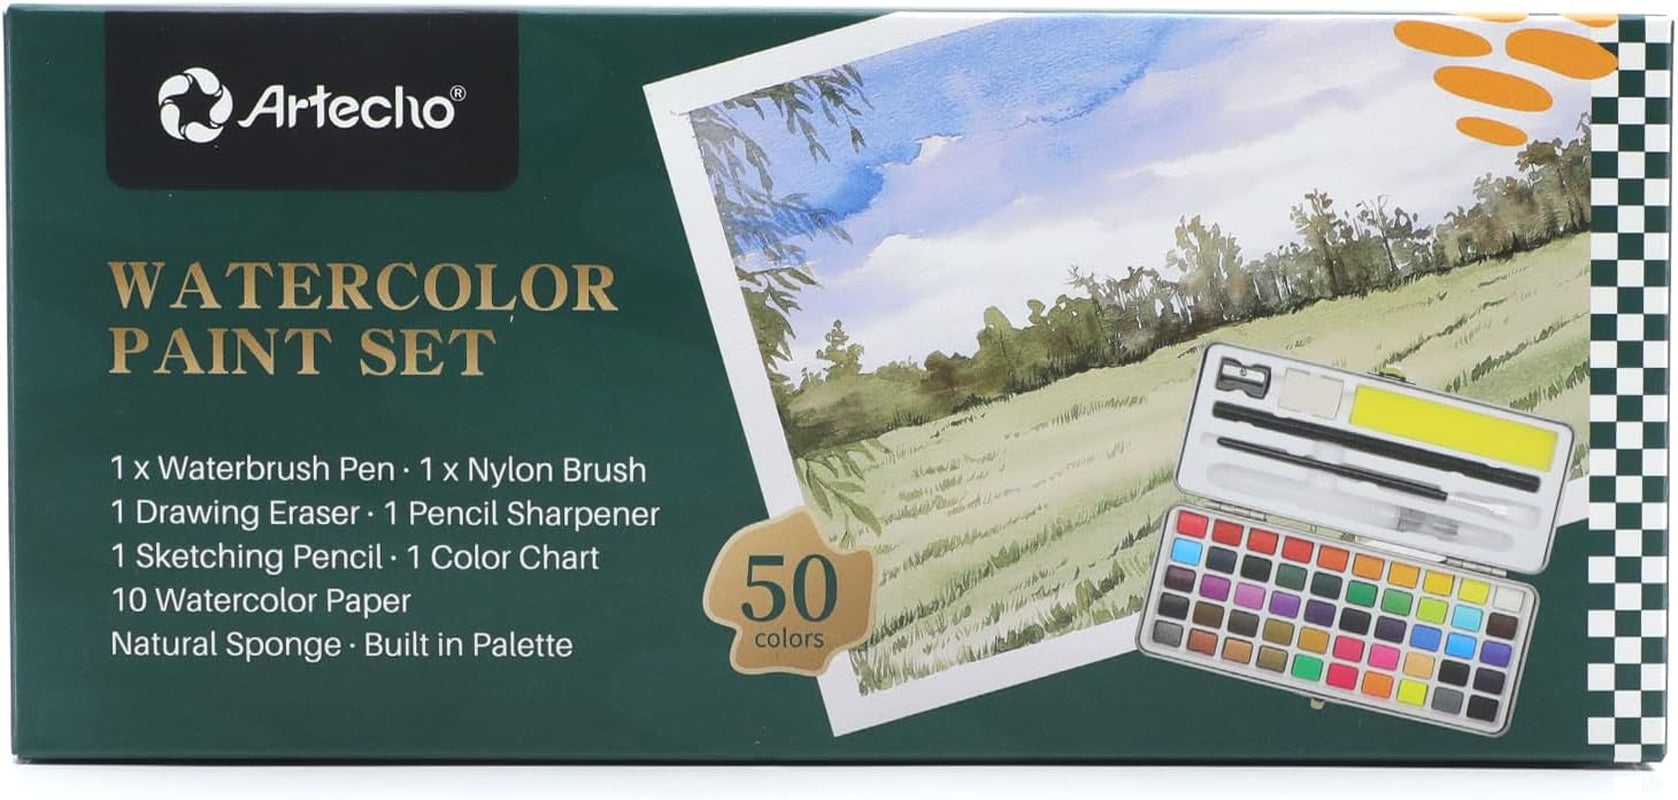 Watercolor Paint Set 50 Colors, Travel Watercolor Set with Watercolor Papers and Brushes, Ideal for Amateur Hobbyists, Painting Lovers and Artists